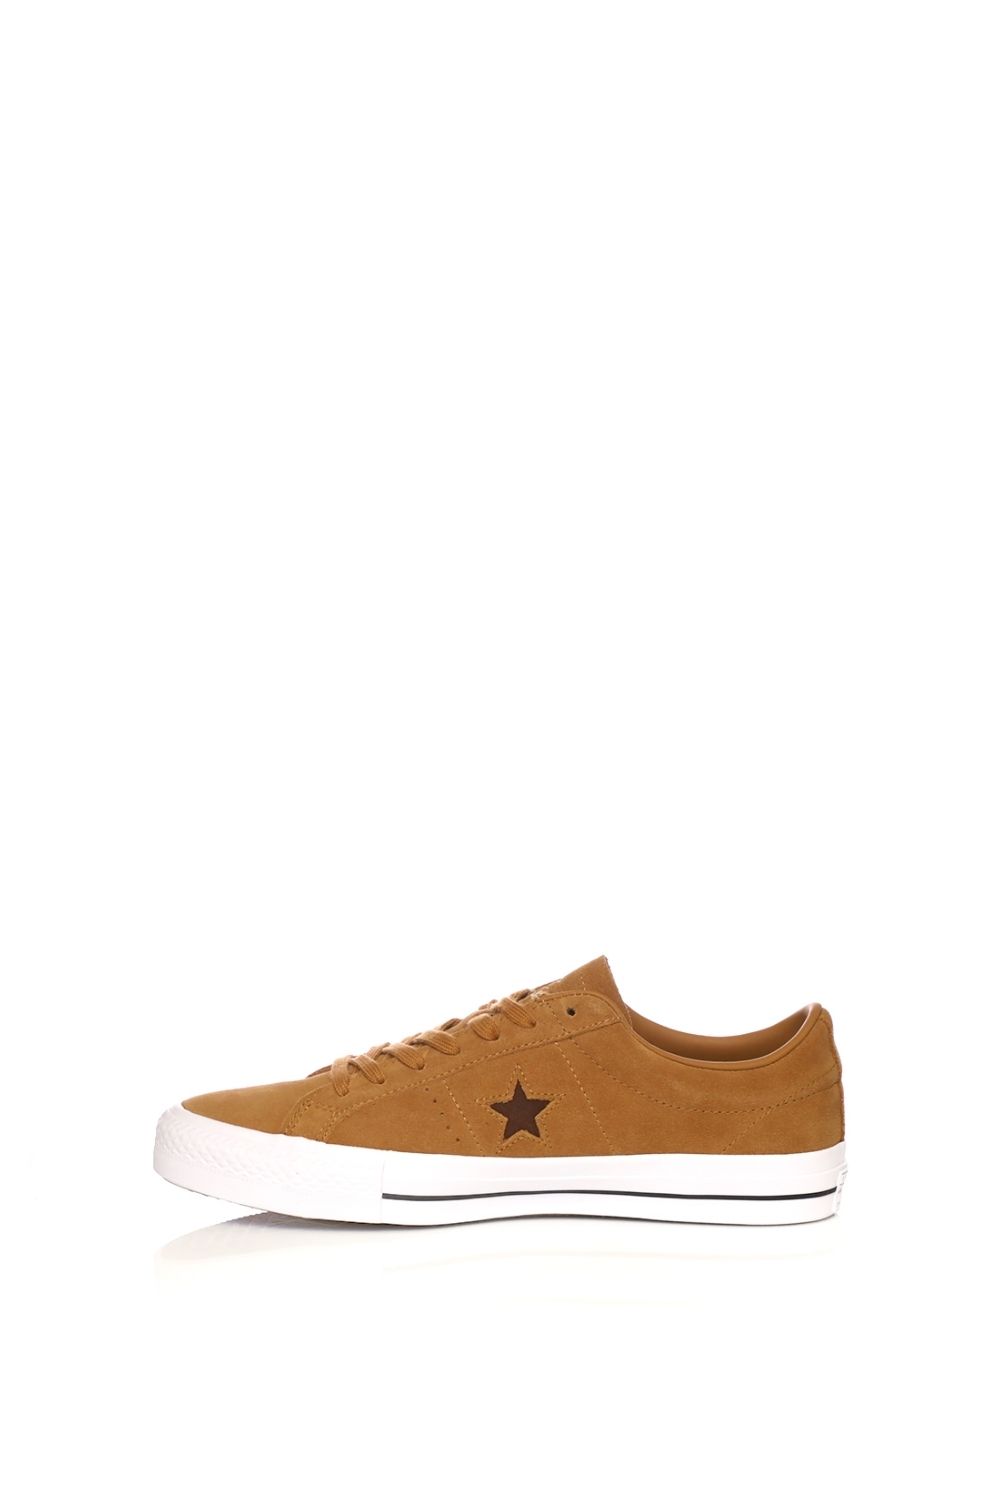 CONVERSE - Ανδρικά sneakers Converse One Star Pro Ox καφέ